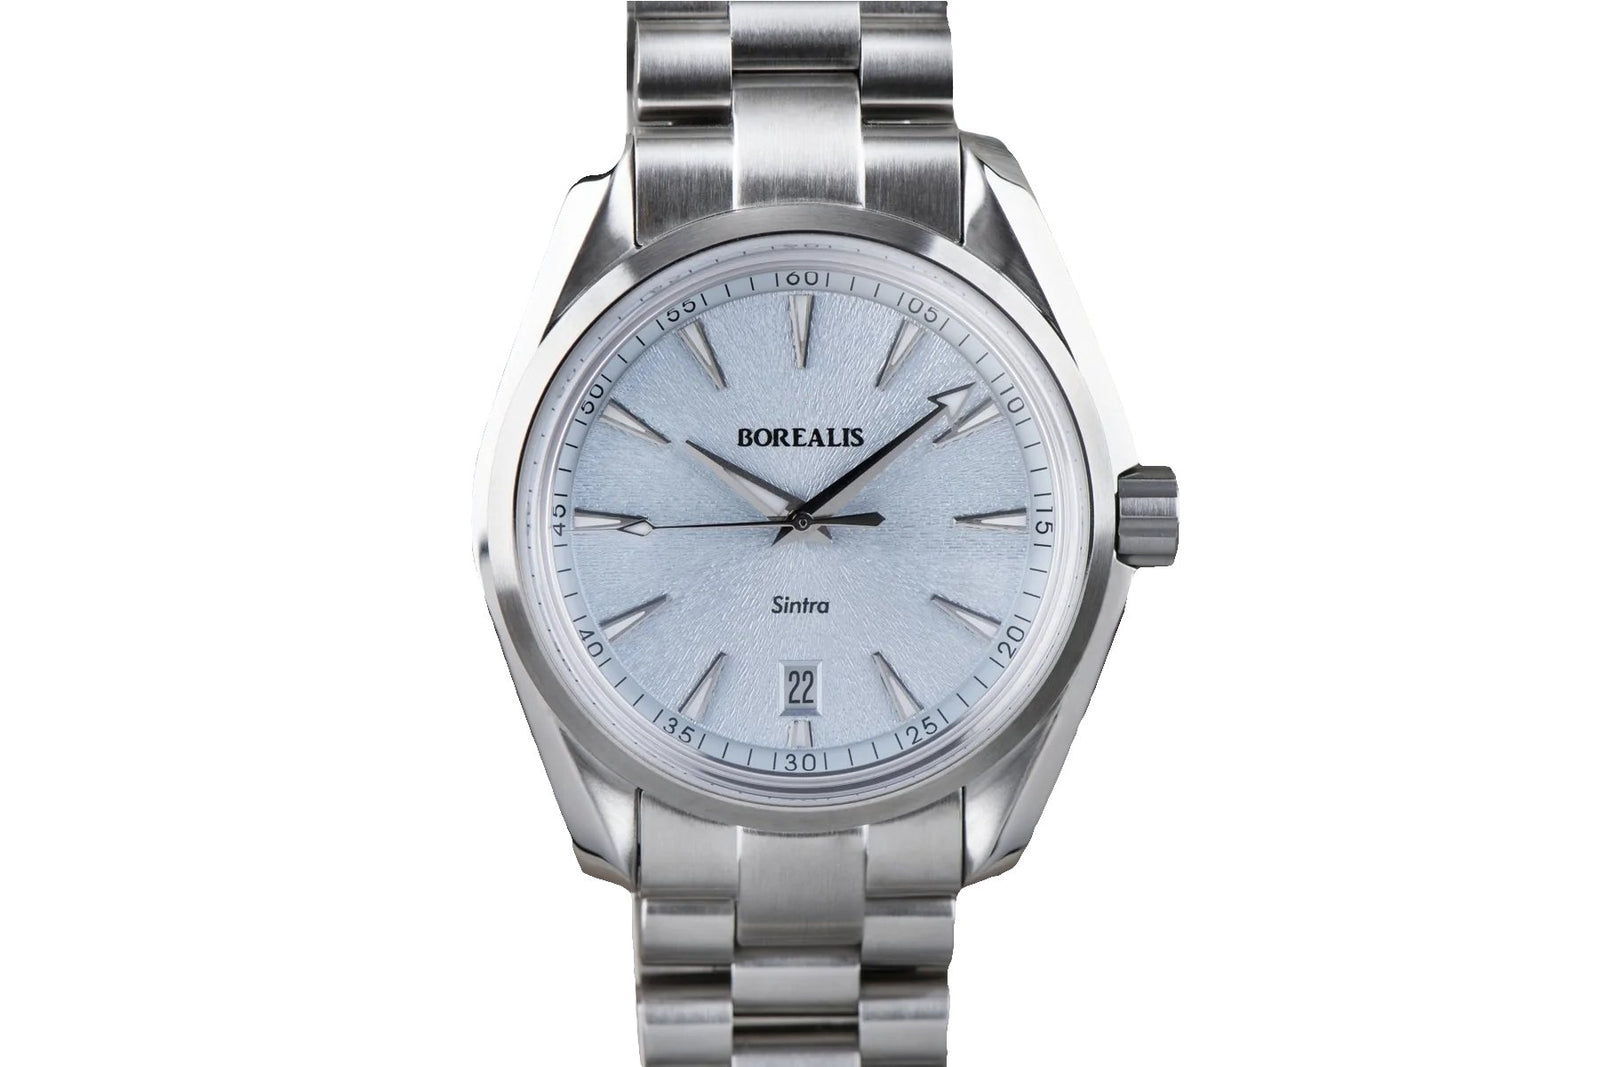 Buy top-notch quality Sintra watches | Borealis Watch Company